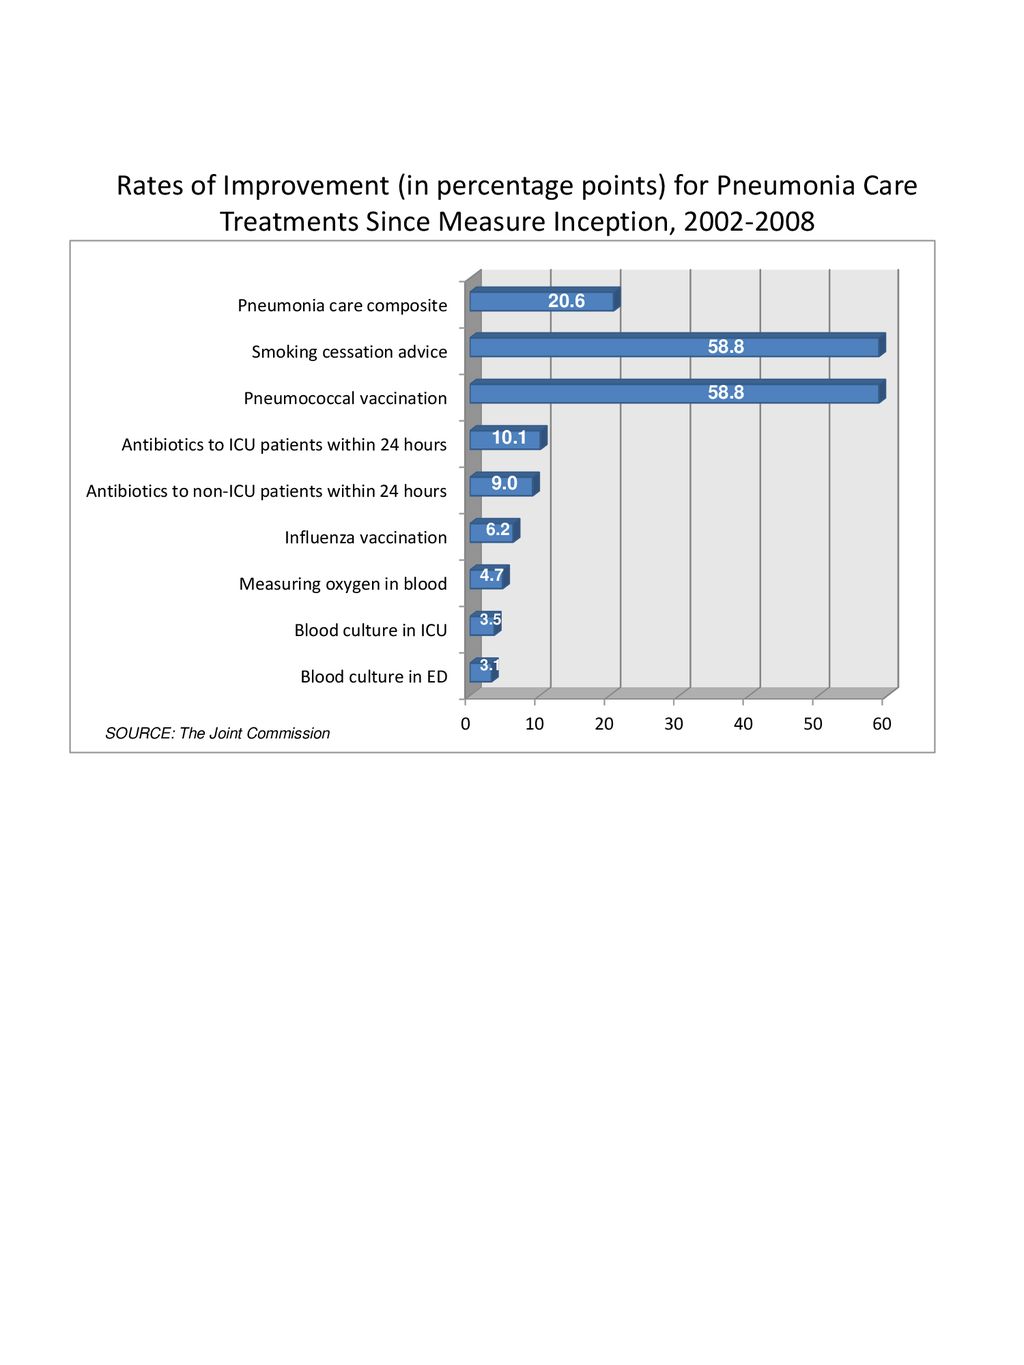 Rates of Improvement (in percentage points) for Pneumonia Care Treatments Since Measure Inception,